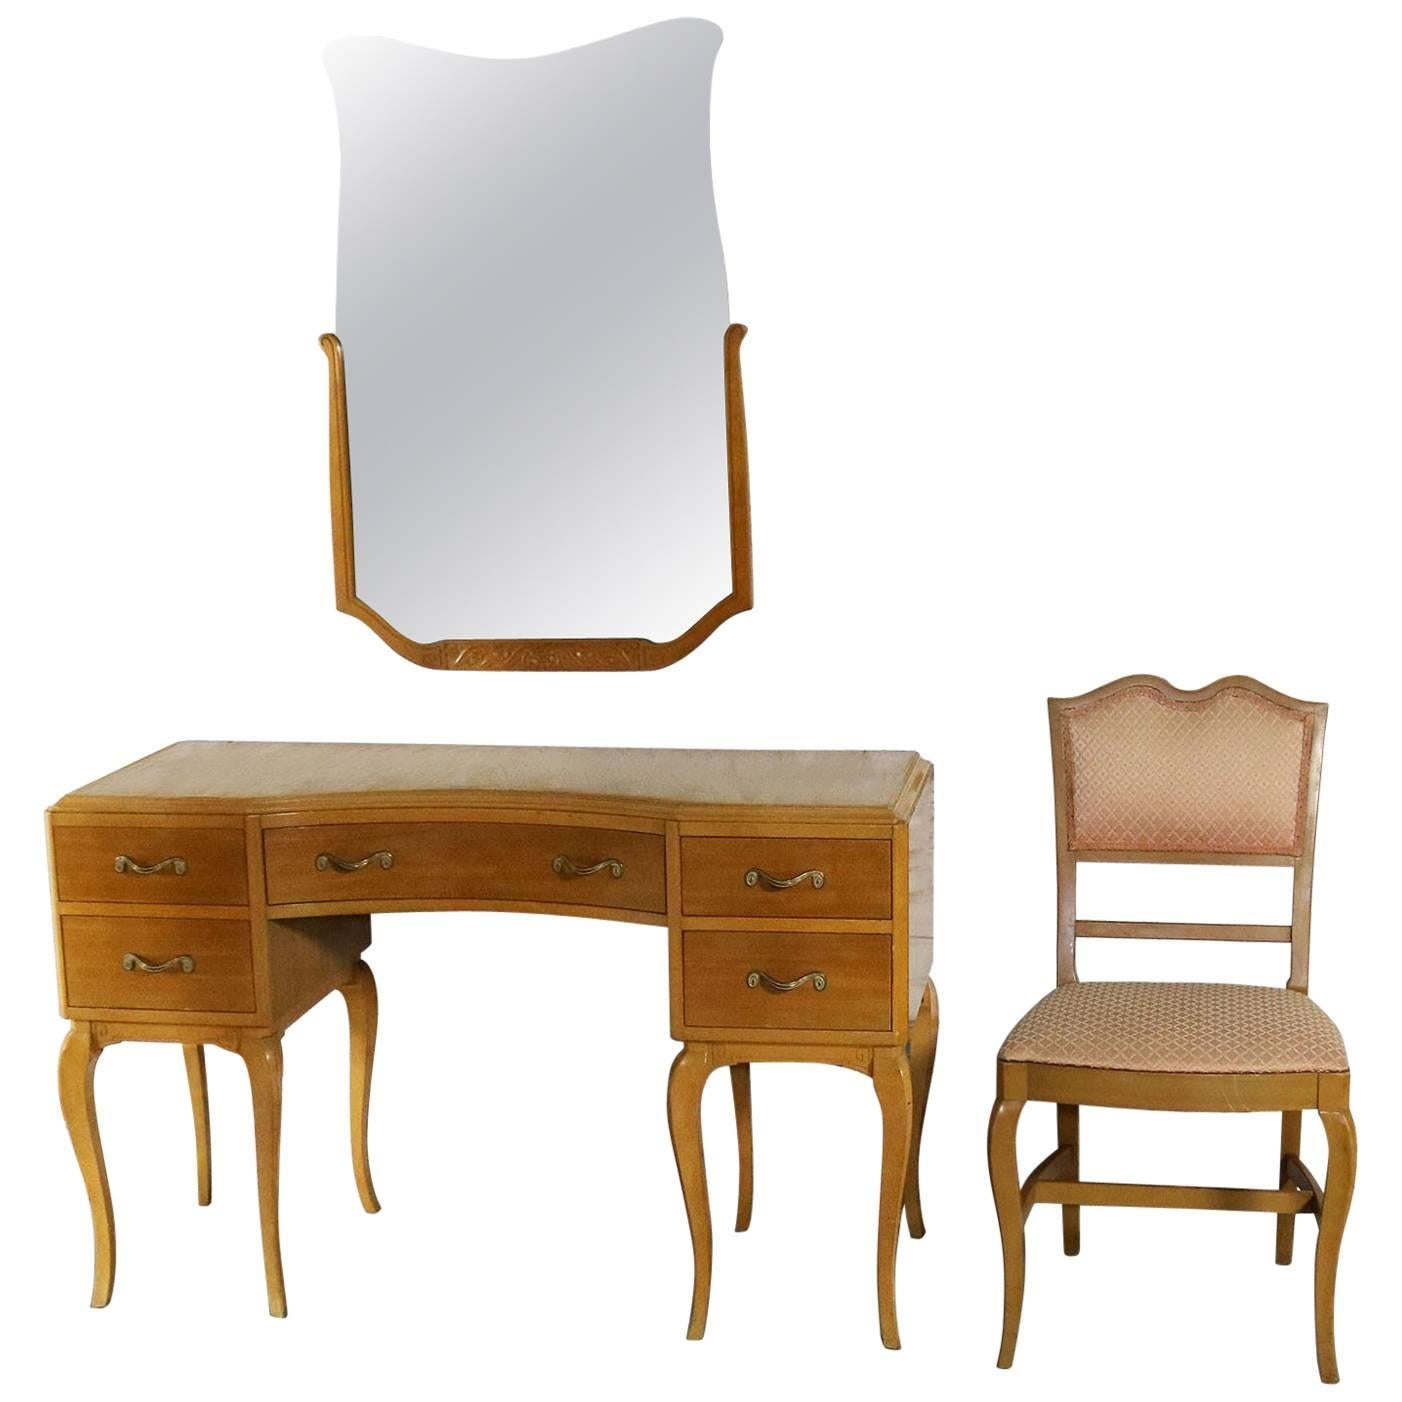 Art Deco Style Vanity Mirror and Chair by Rway Northern Furniture Co. Sheboygan